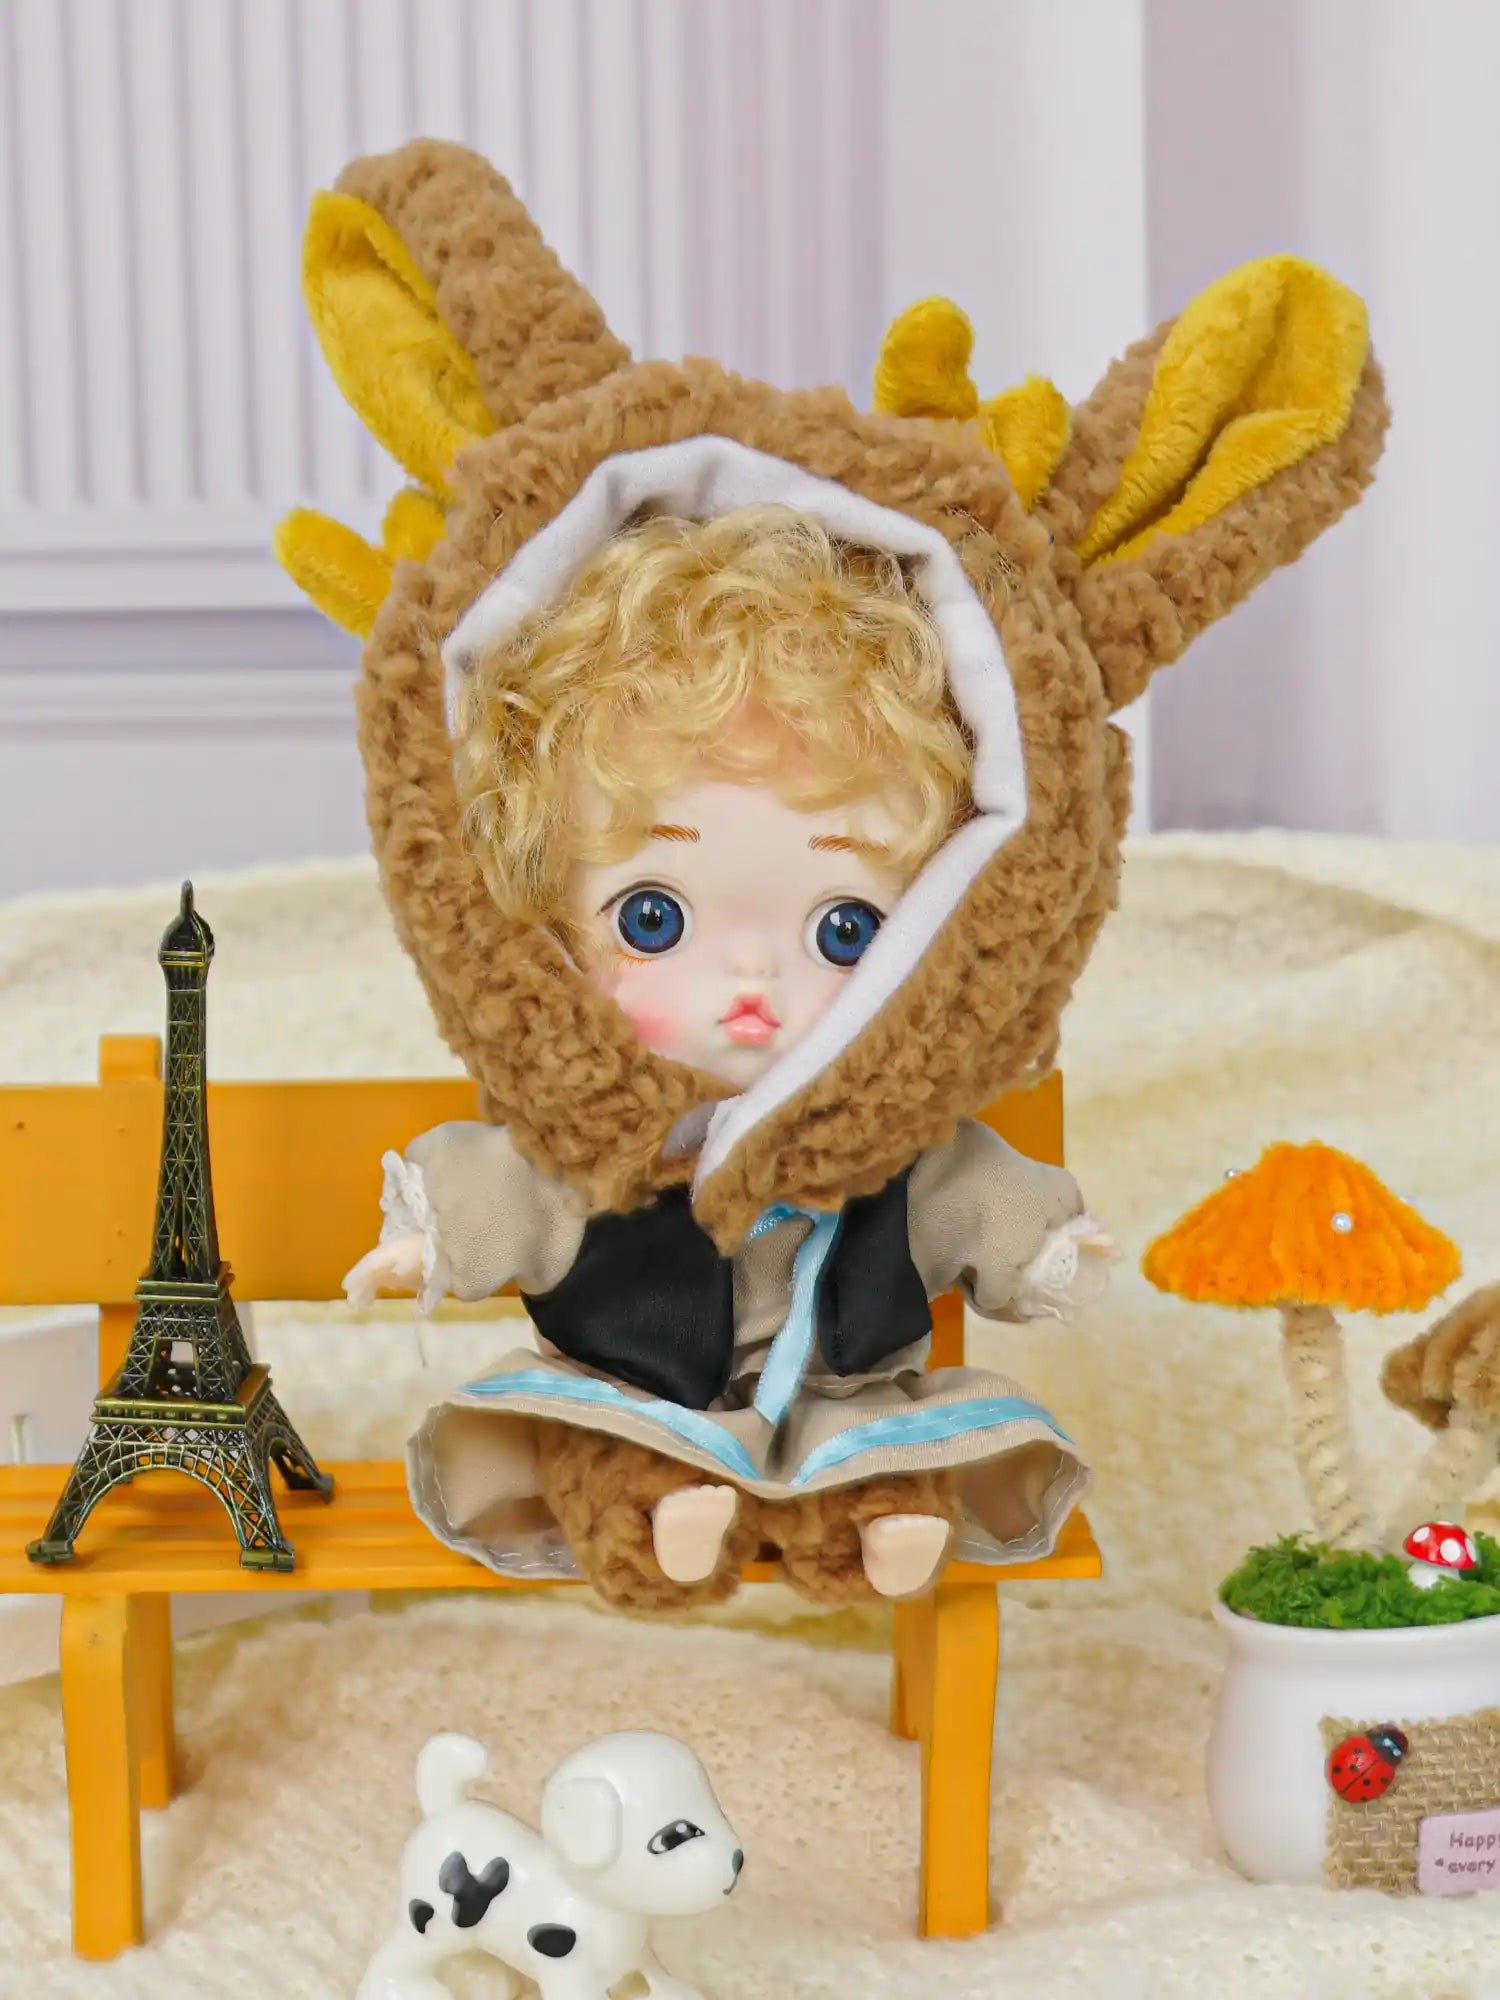 A fantasy scene with a doll in a bunny outfit, complete with a toy Eiffel Tower and a white puppy figurine.